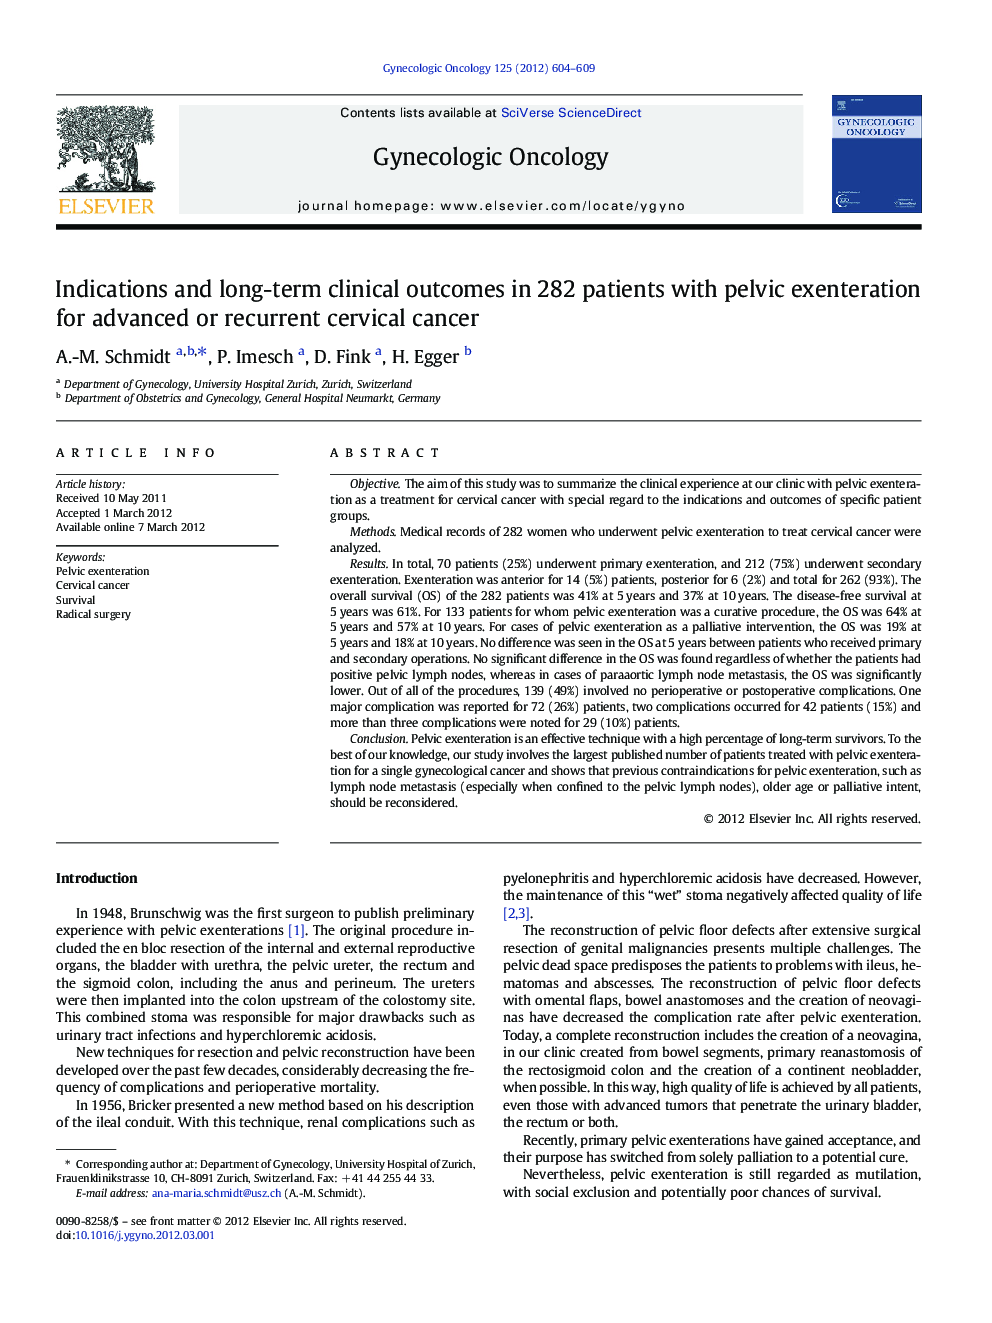 Indications and long-term clinical outcomes in 282 patients with pelvic exenteration for advanced or recurrent cervical cancer